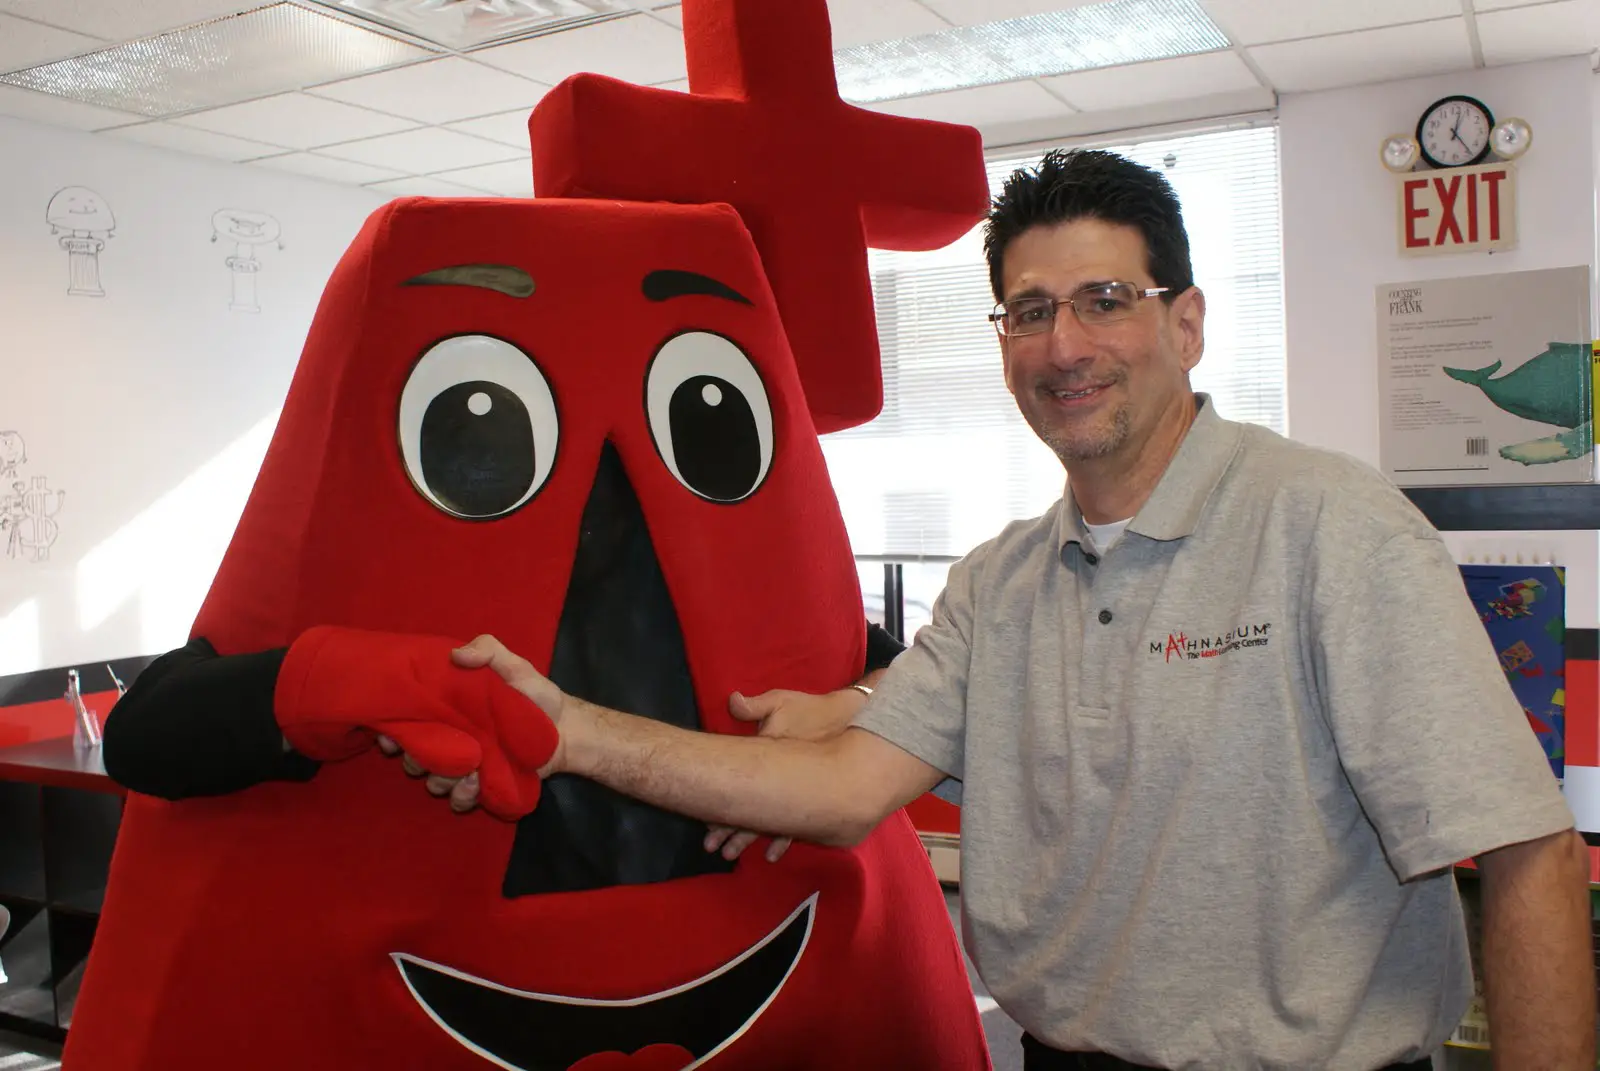 Mathnasium of New Hyde Park center director Peter Abrams greets mascot A+ at  the grand opening on January 16.